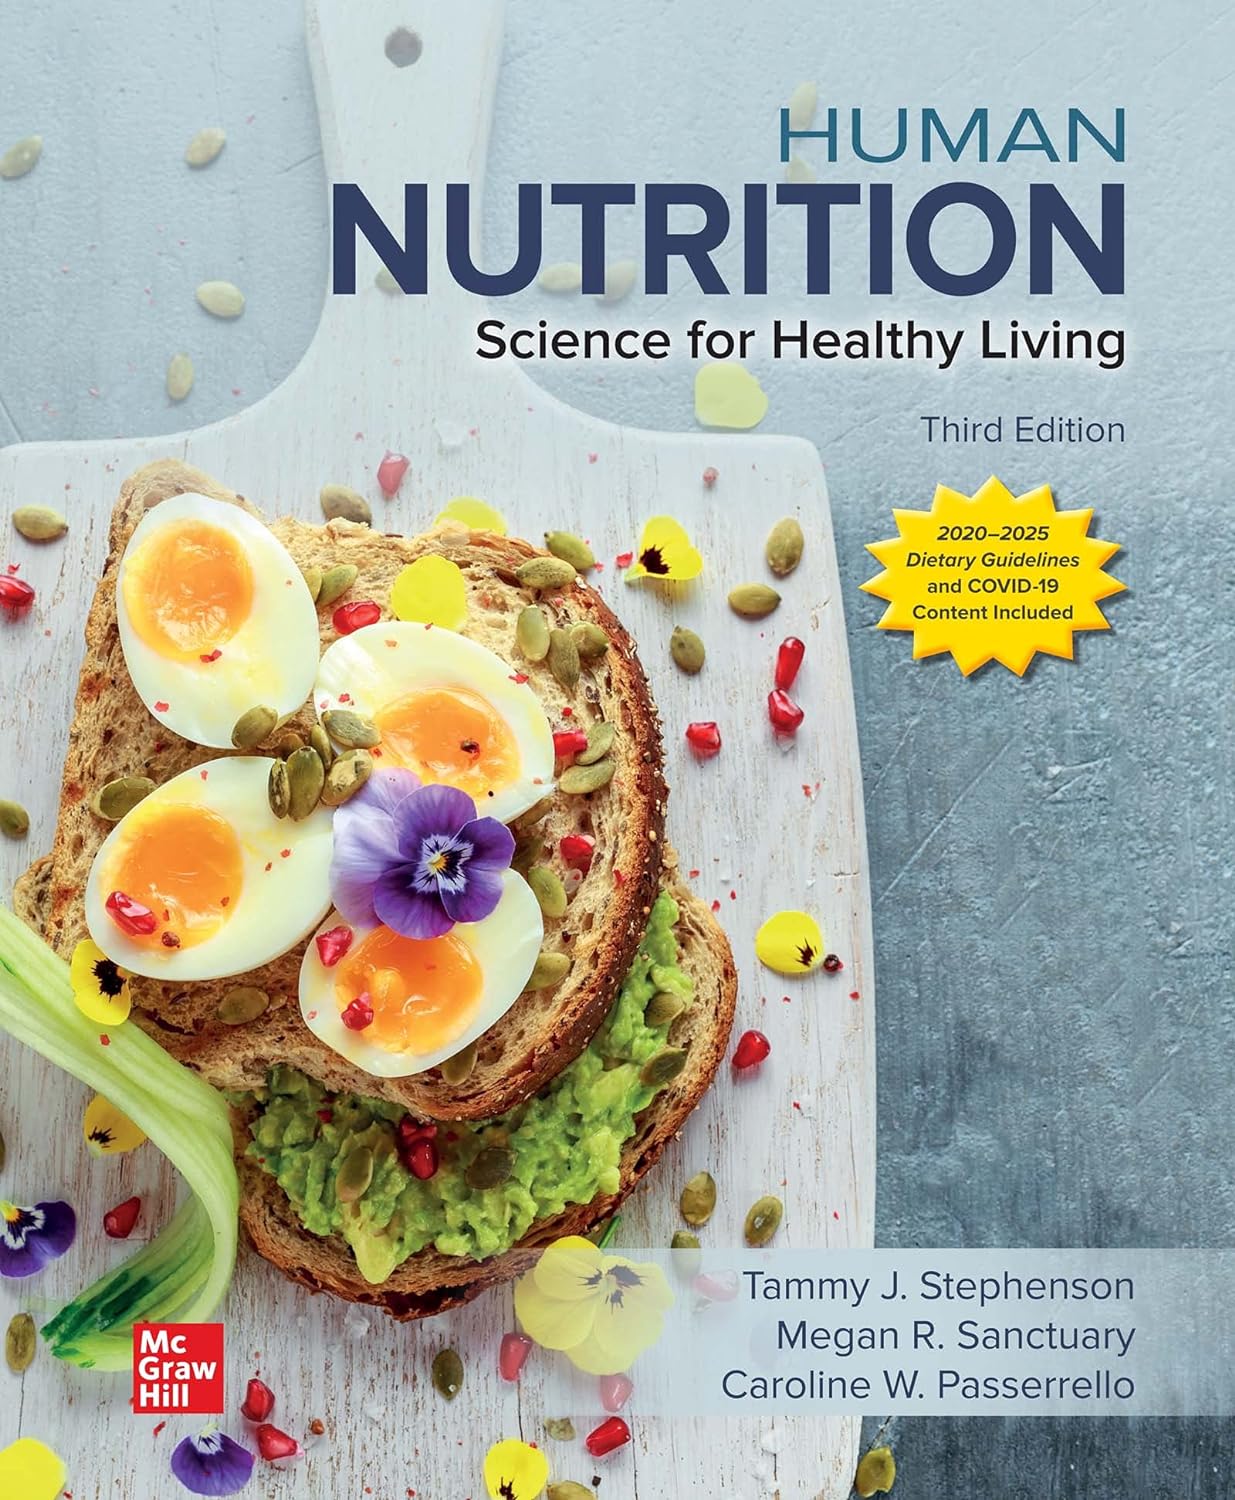 Human Nutrition: Science for Healthy Living (3rd Edition) - eBook